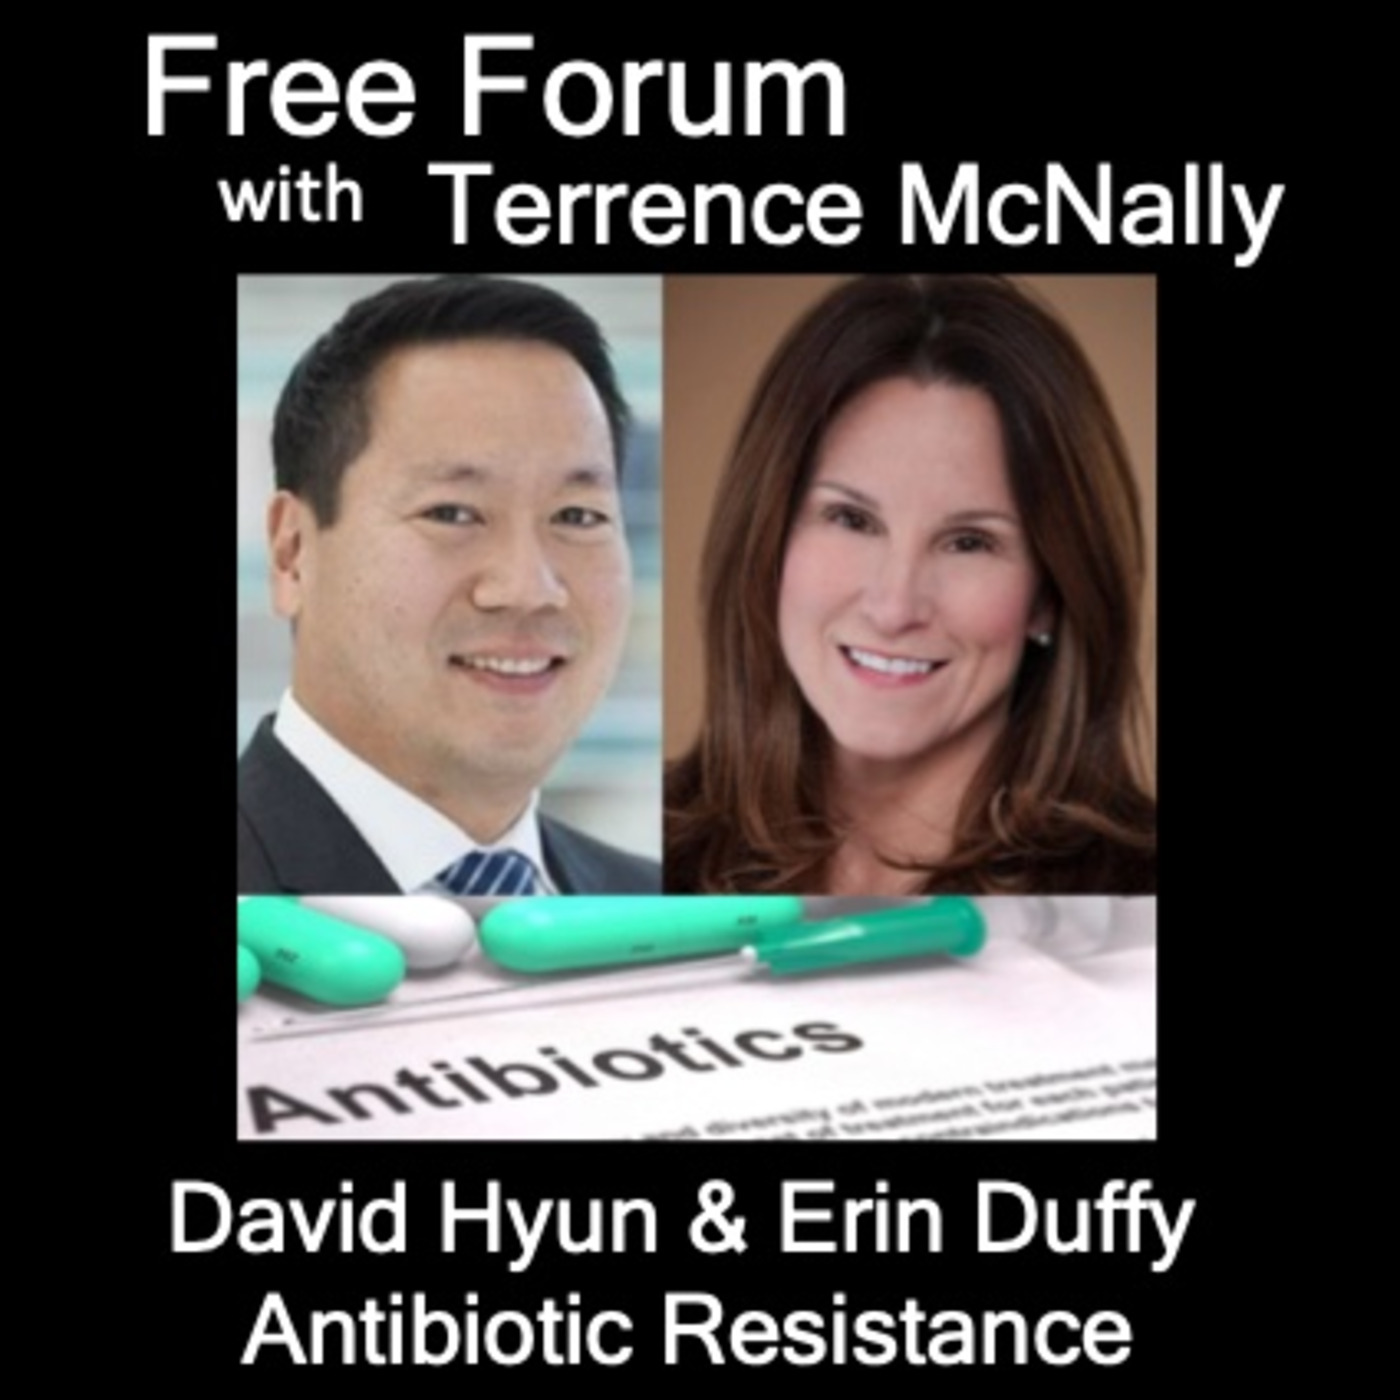 Episode 554: Are Antibiotics Doomed? DAVID HYUN & ERIN DUFFY on the Crisis No One Talks About